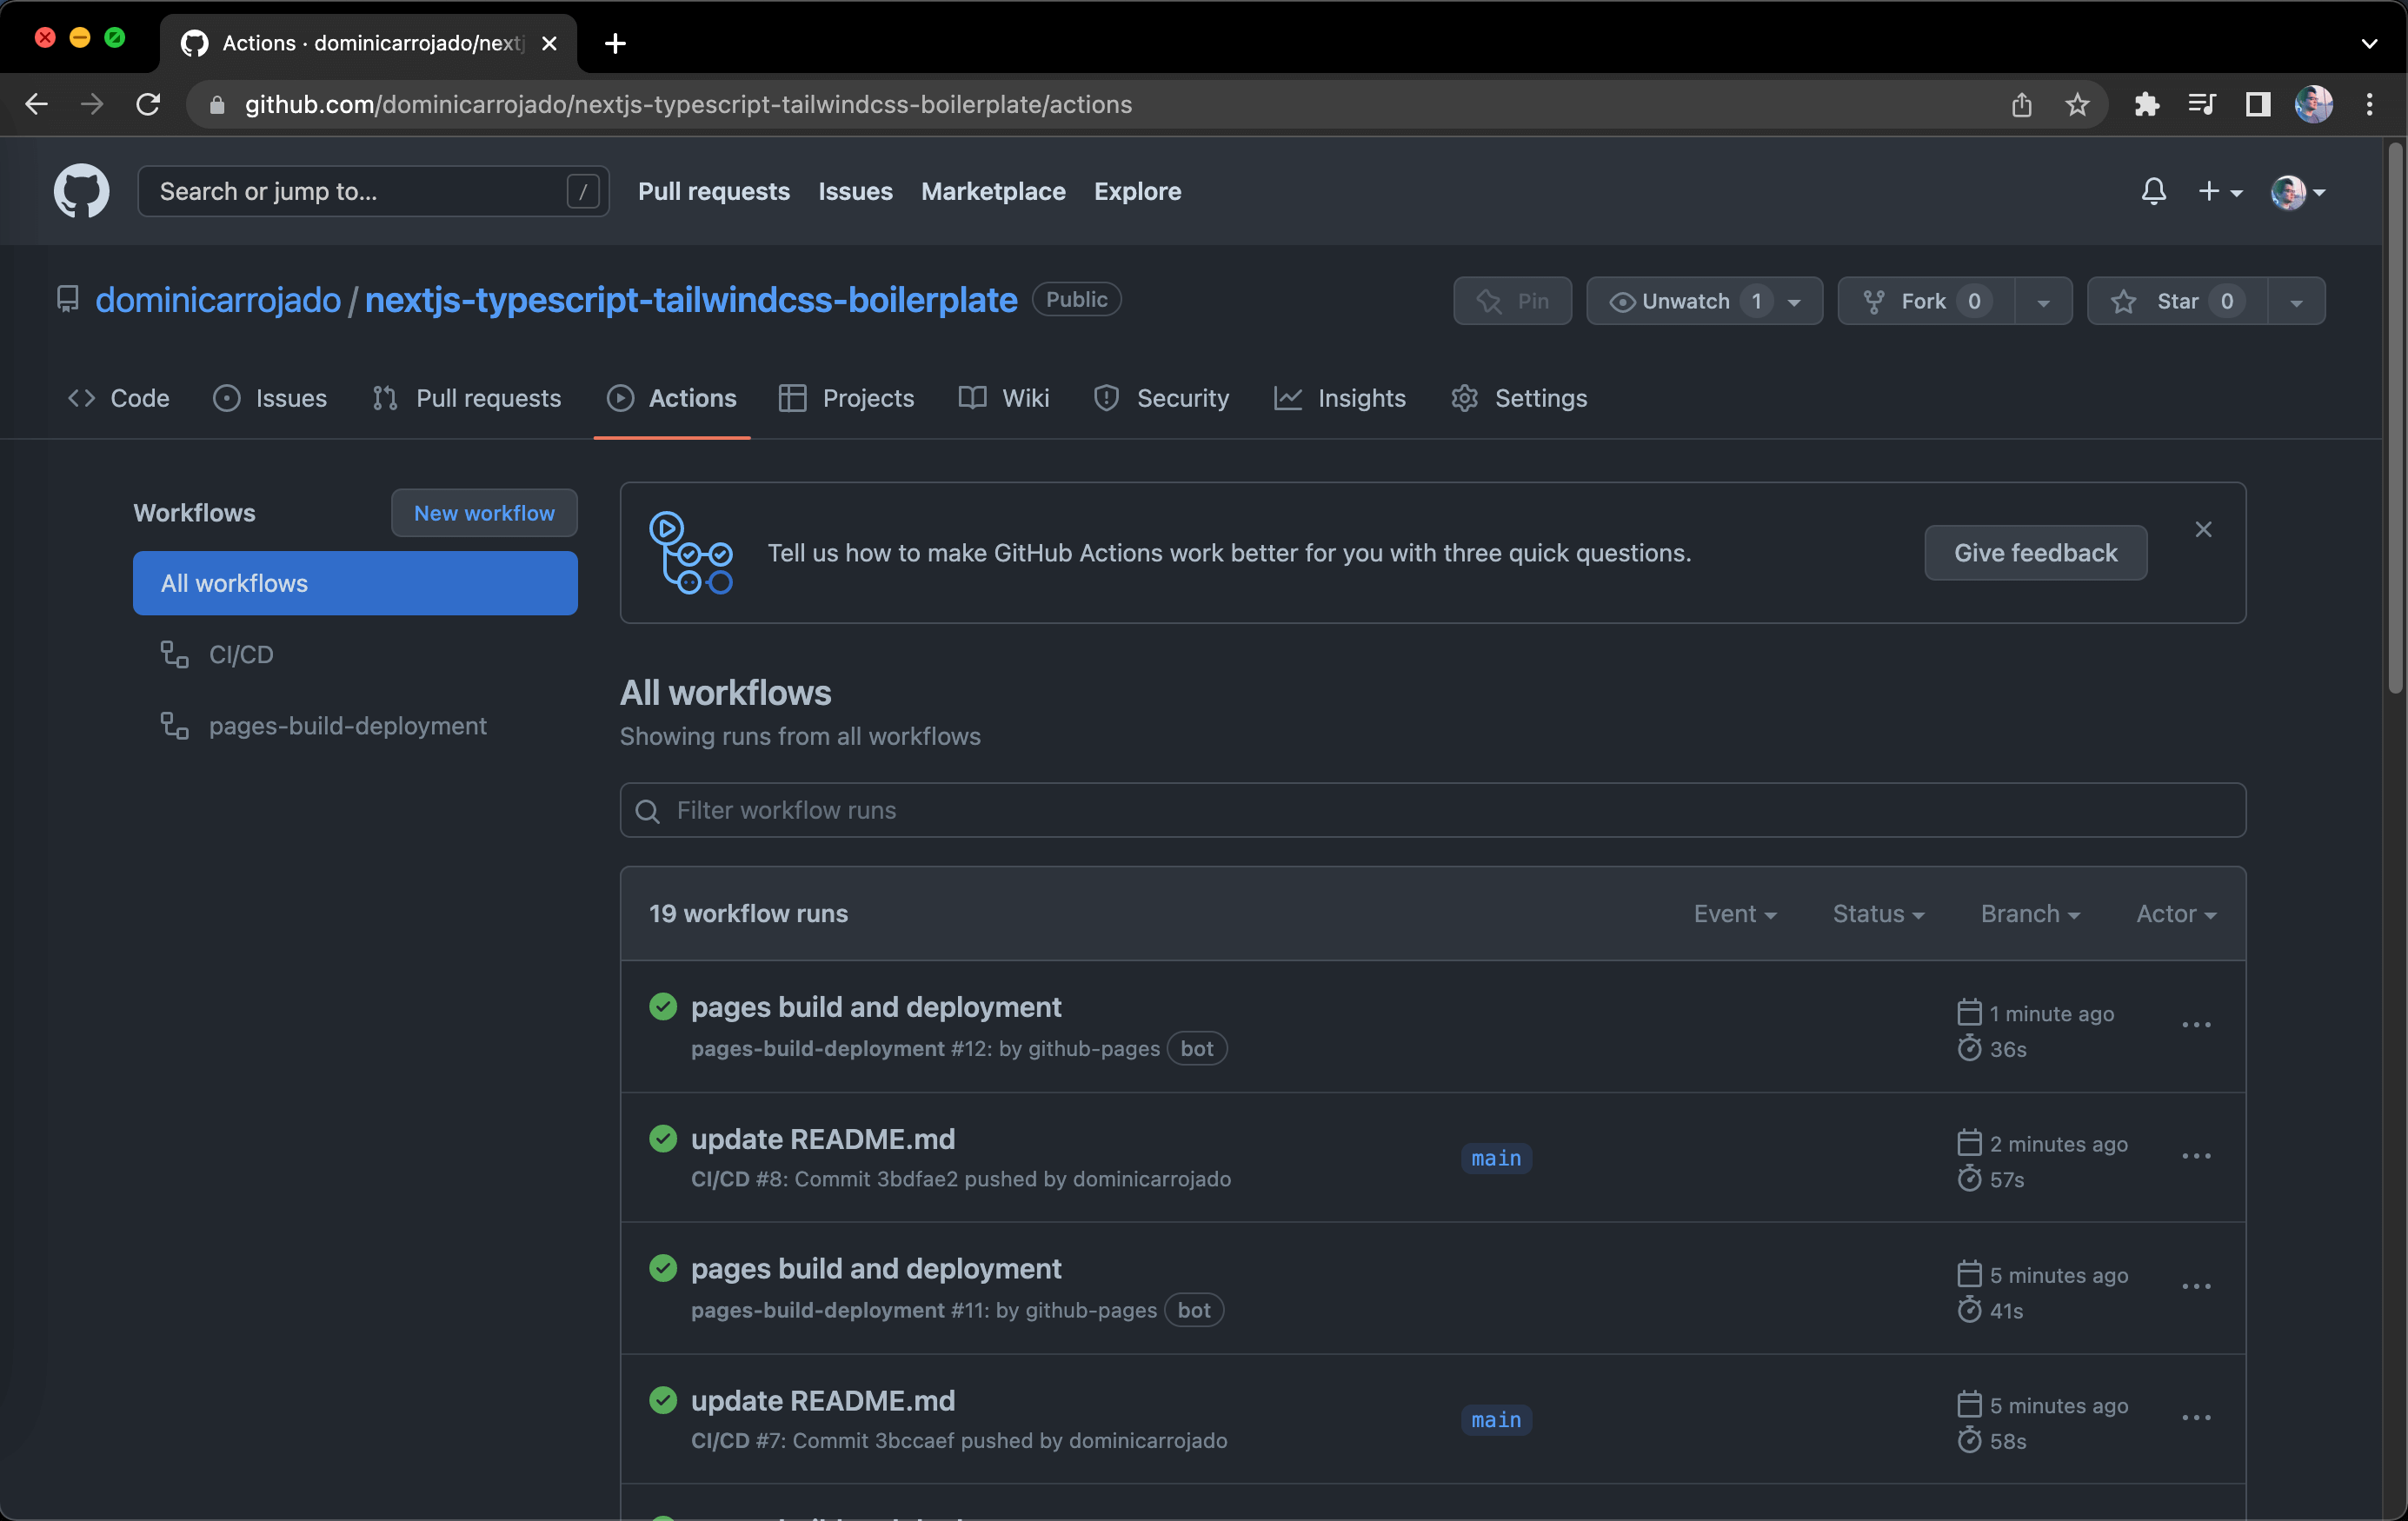 Screenshot of all workflows on GitHub Actions